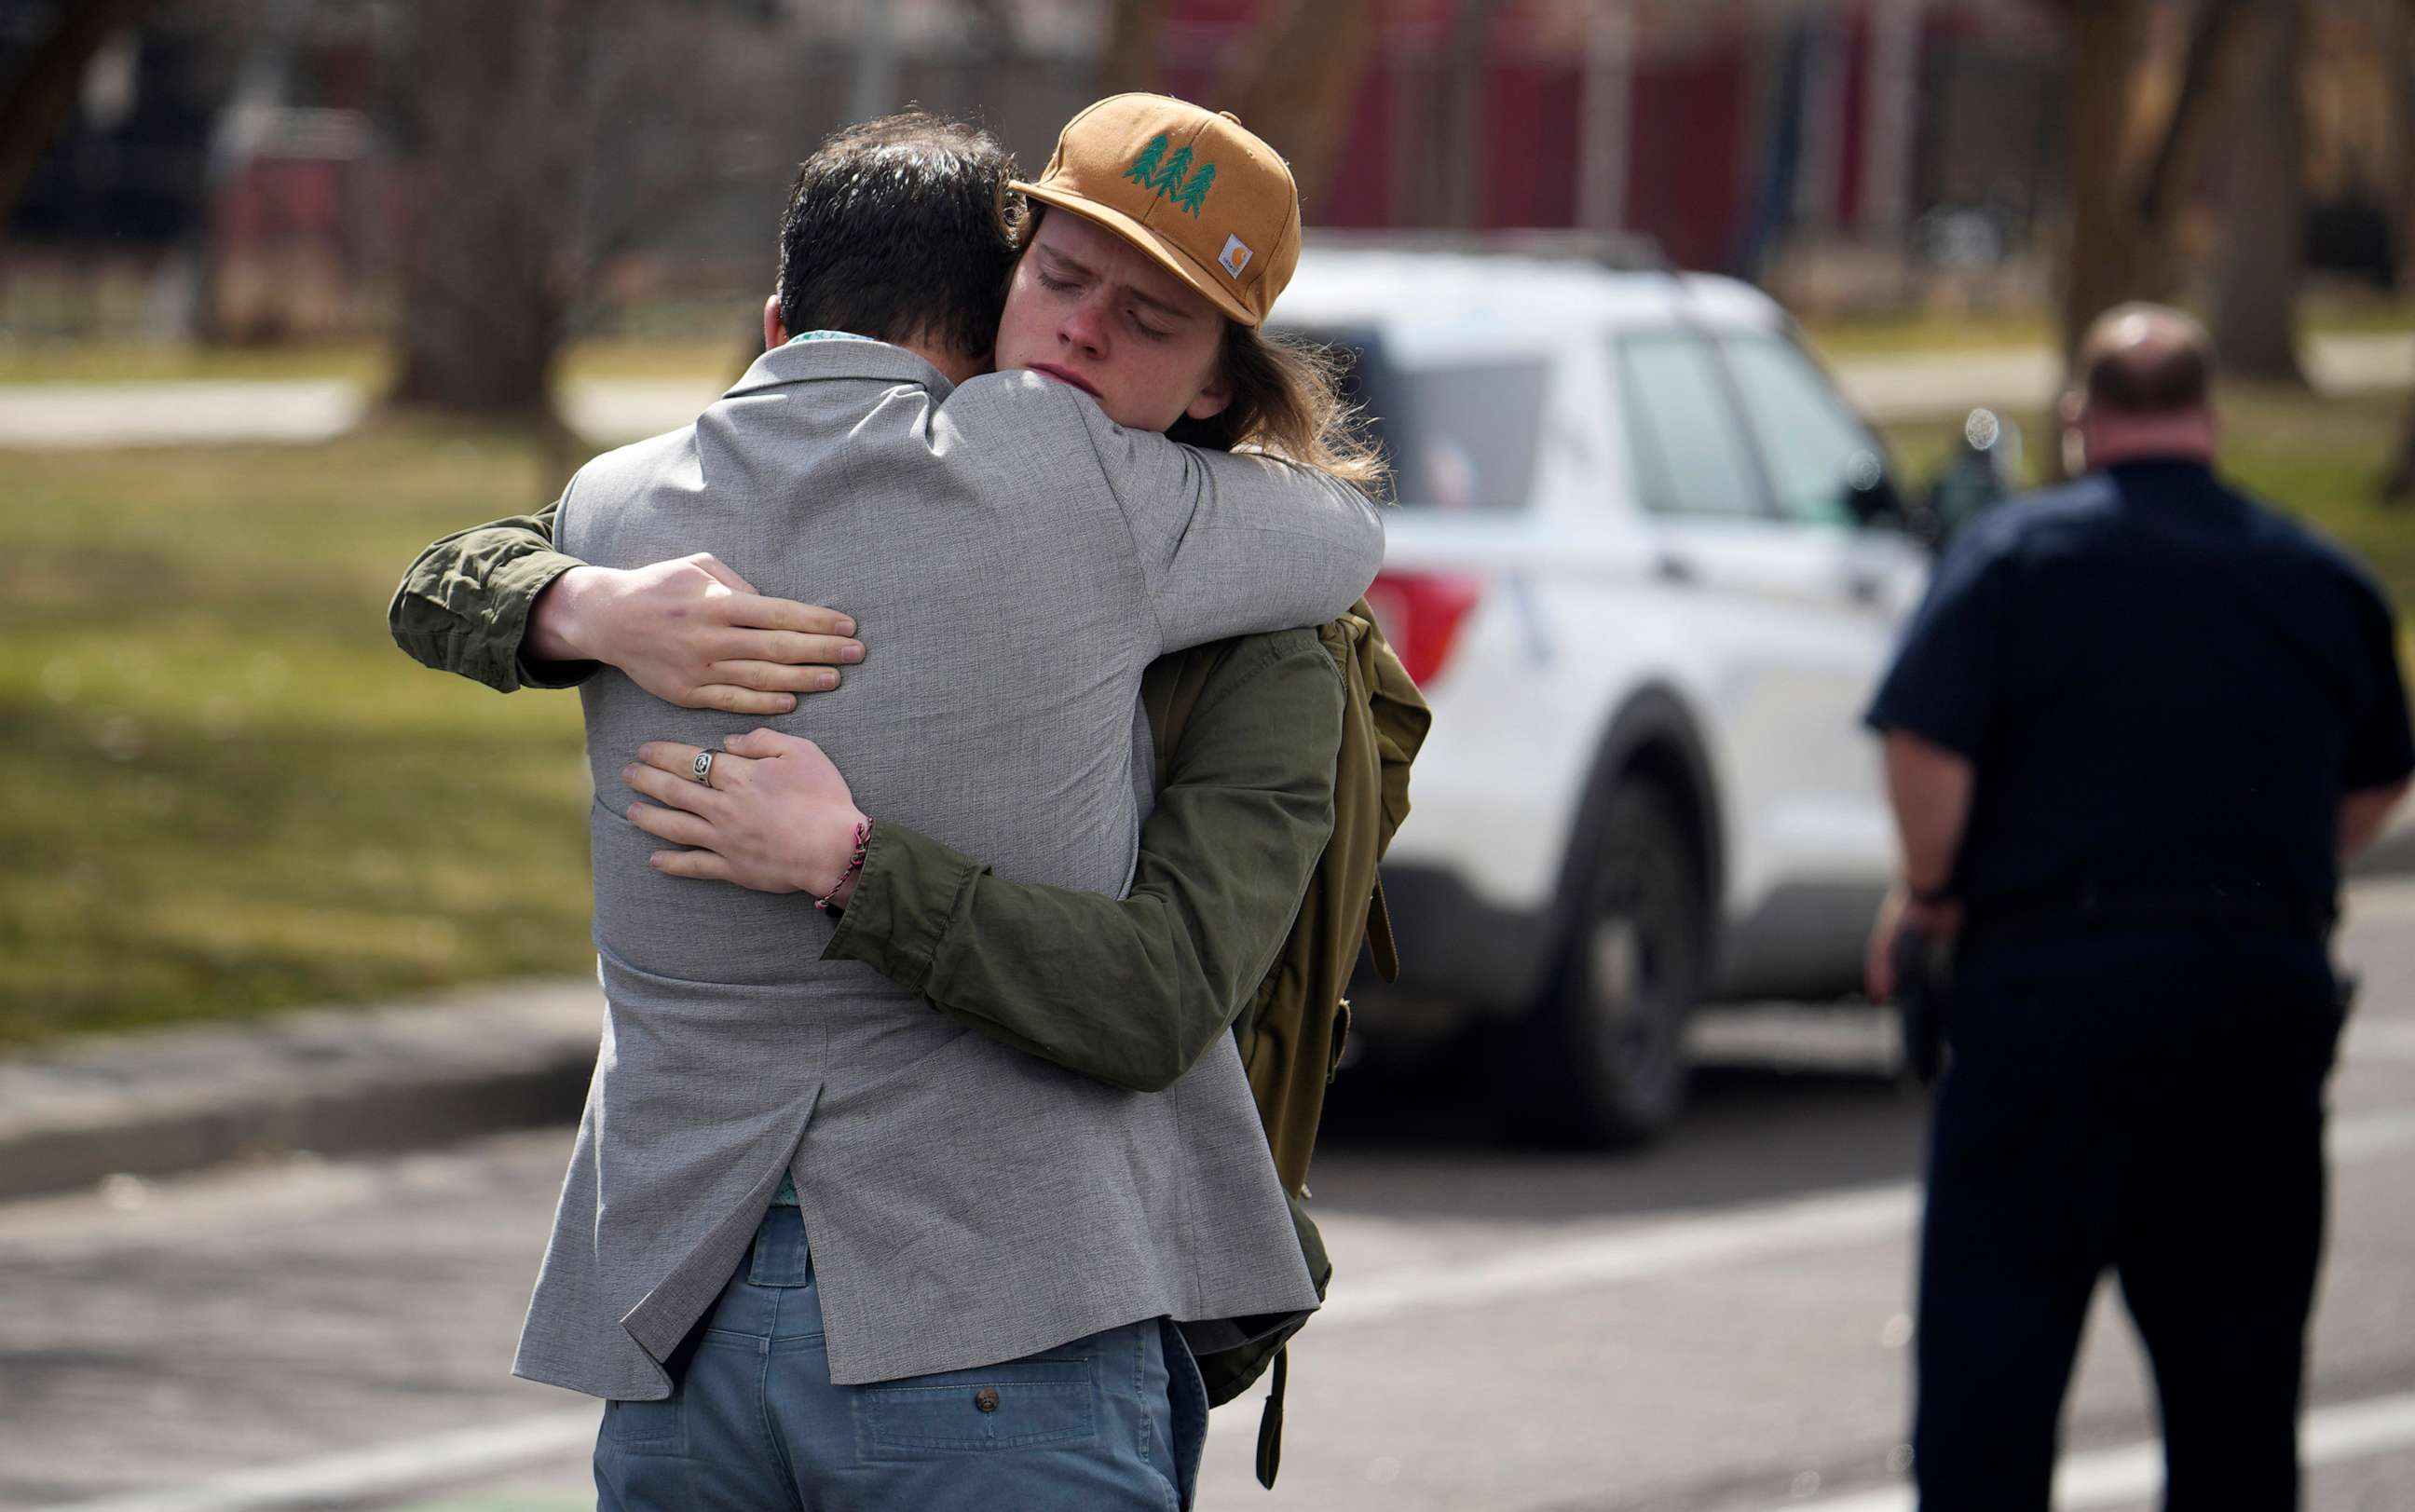 PHOTO: A student, right, hugs a man after a school shooting at East High School, March 22, 2023, in Denver.